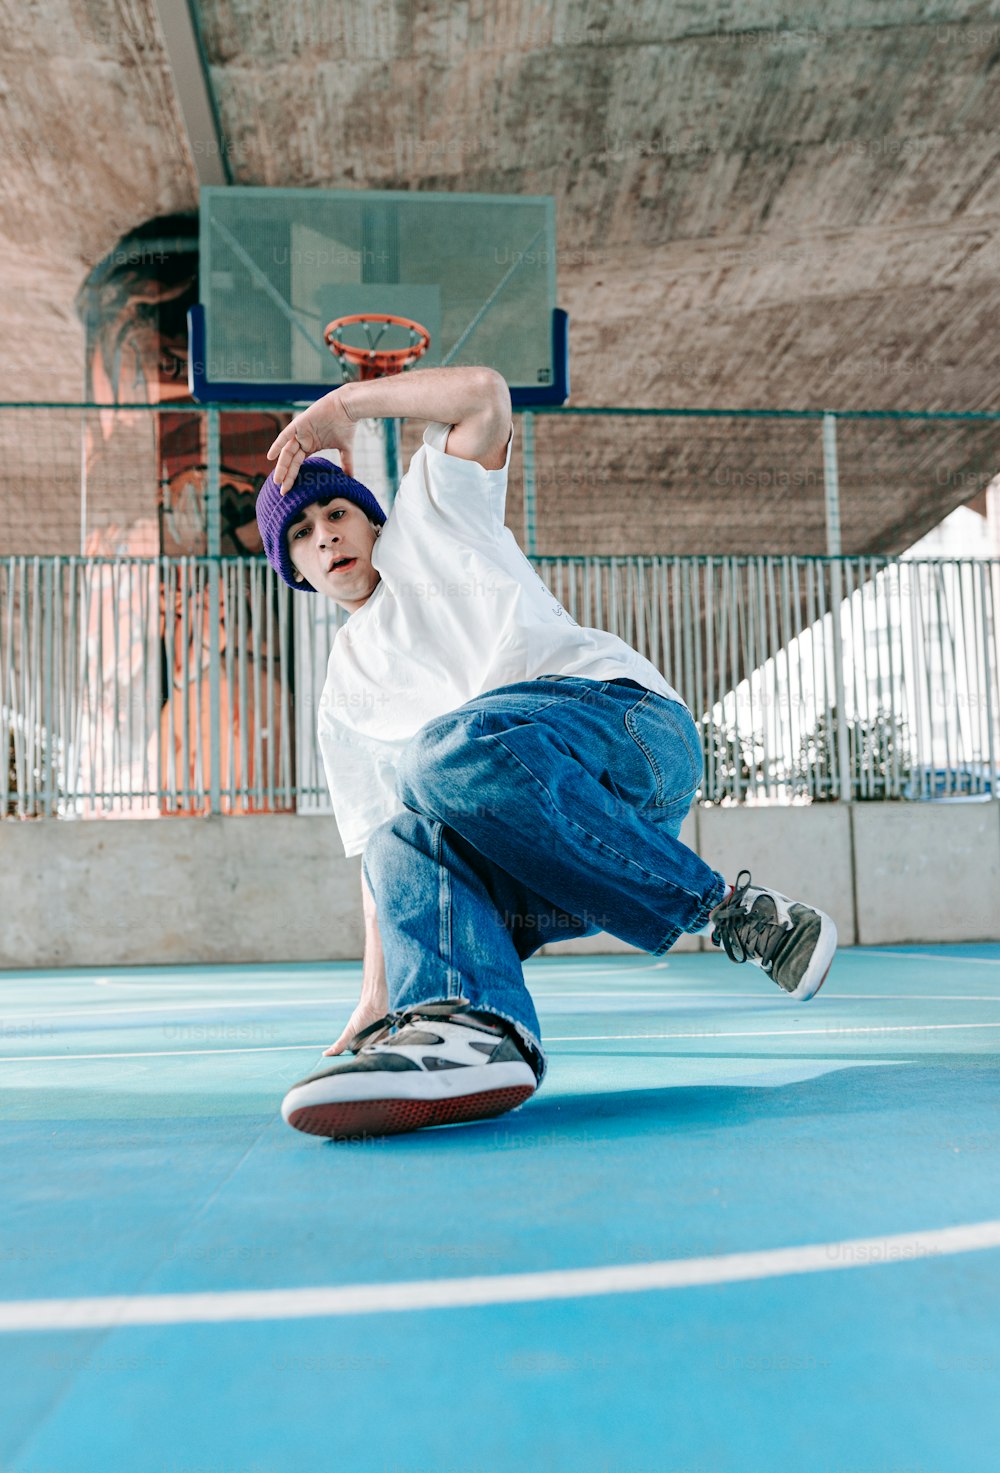 a young man is doing a trick on a skateboard